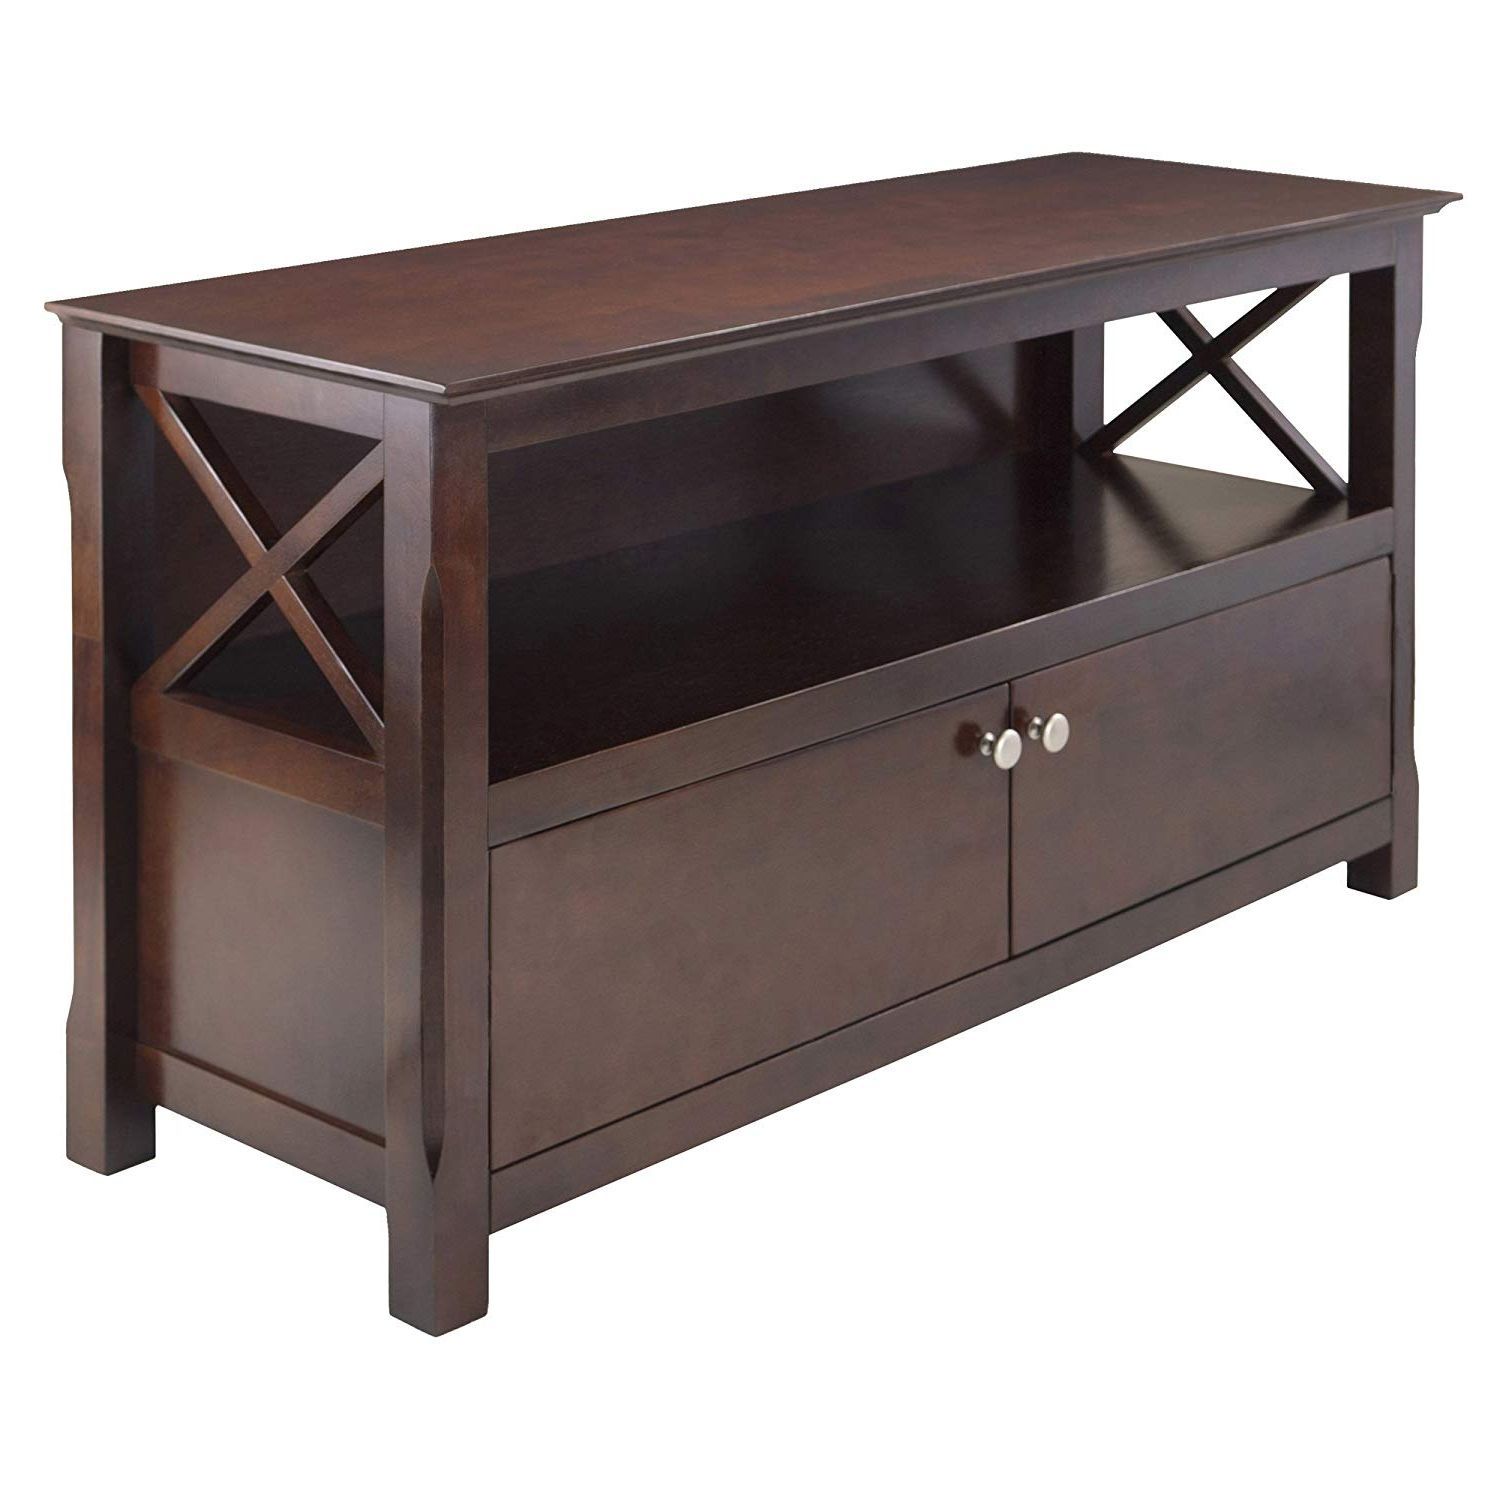 Tv Cabinets With Storage Intended For Most Popular Amazon: Winsome Wood Xola Tv Stand: Kitchen & Dining (View 5 of 20)